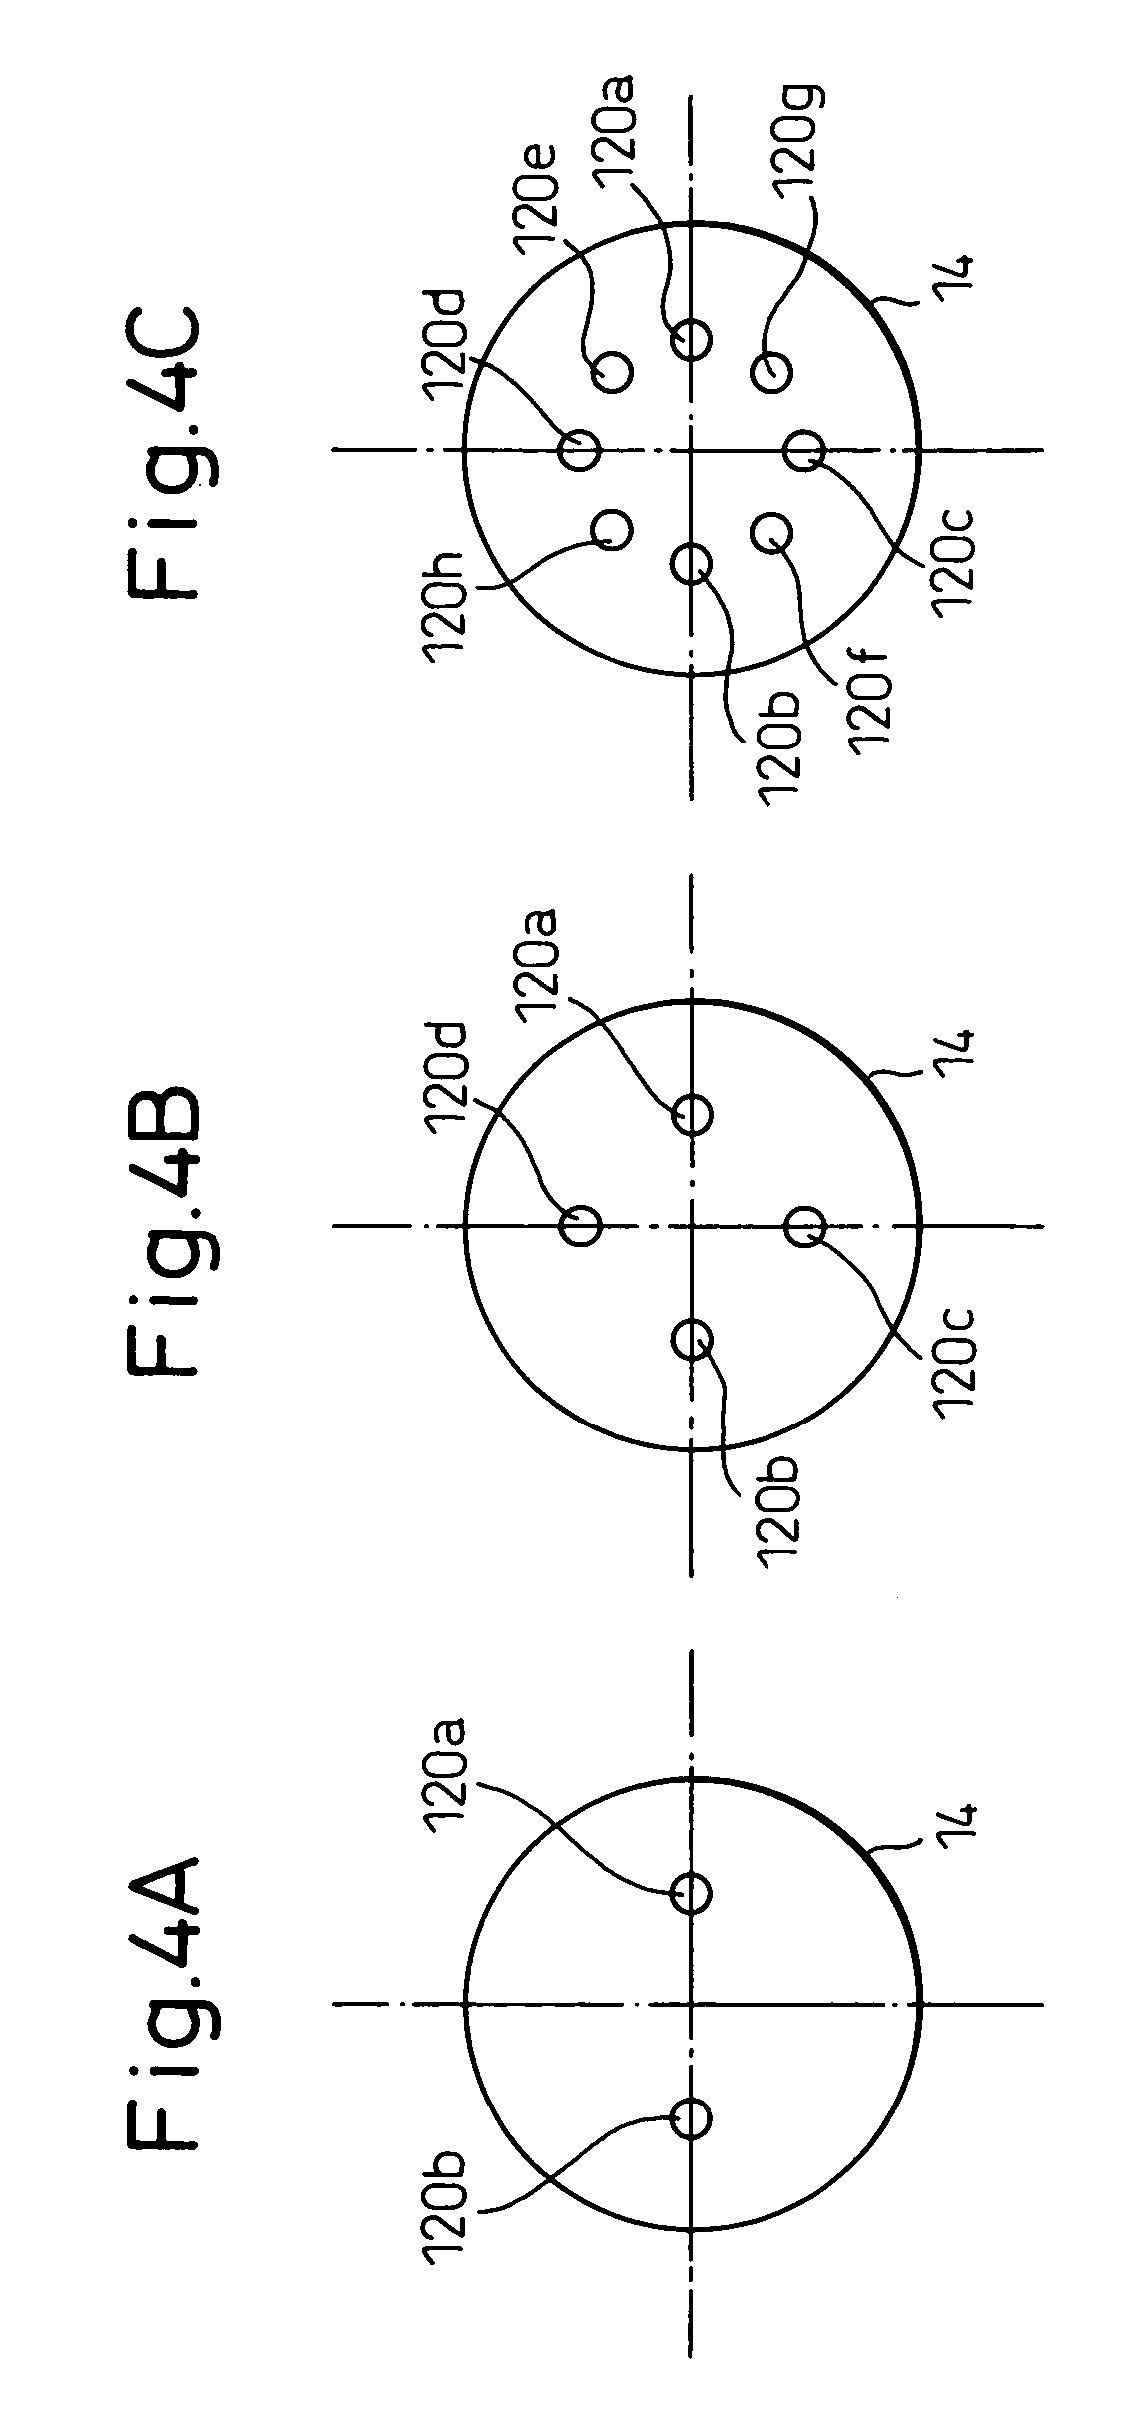 Optical collimator structure